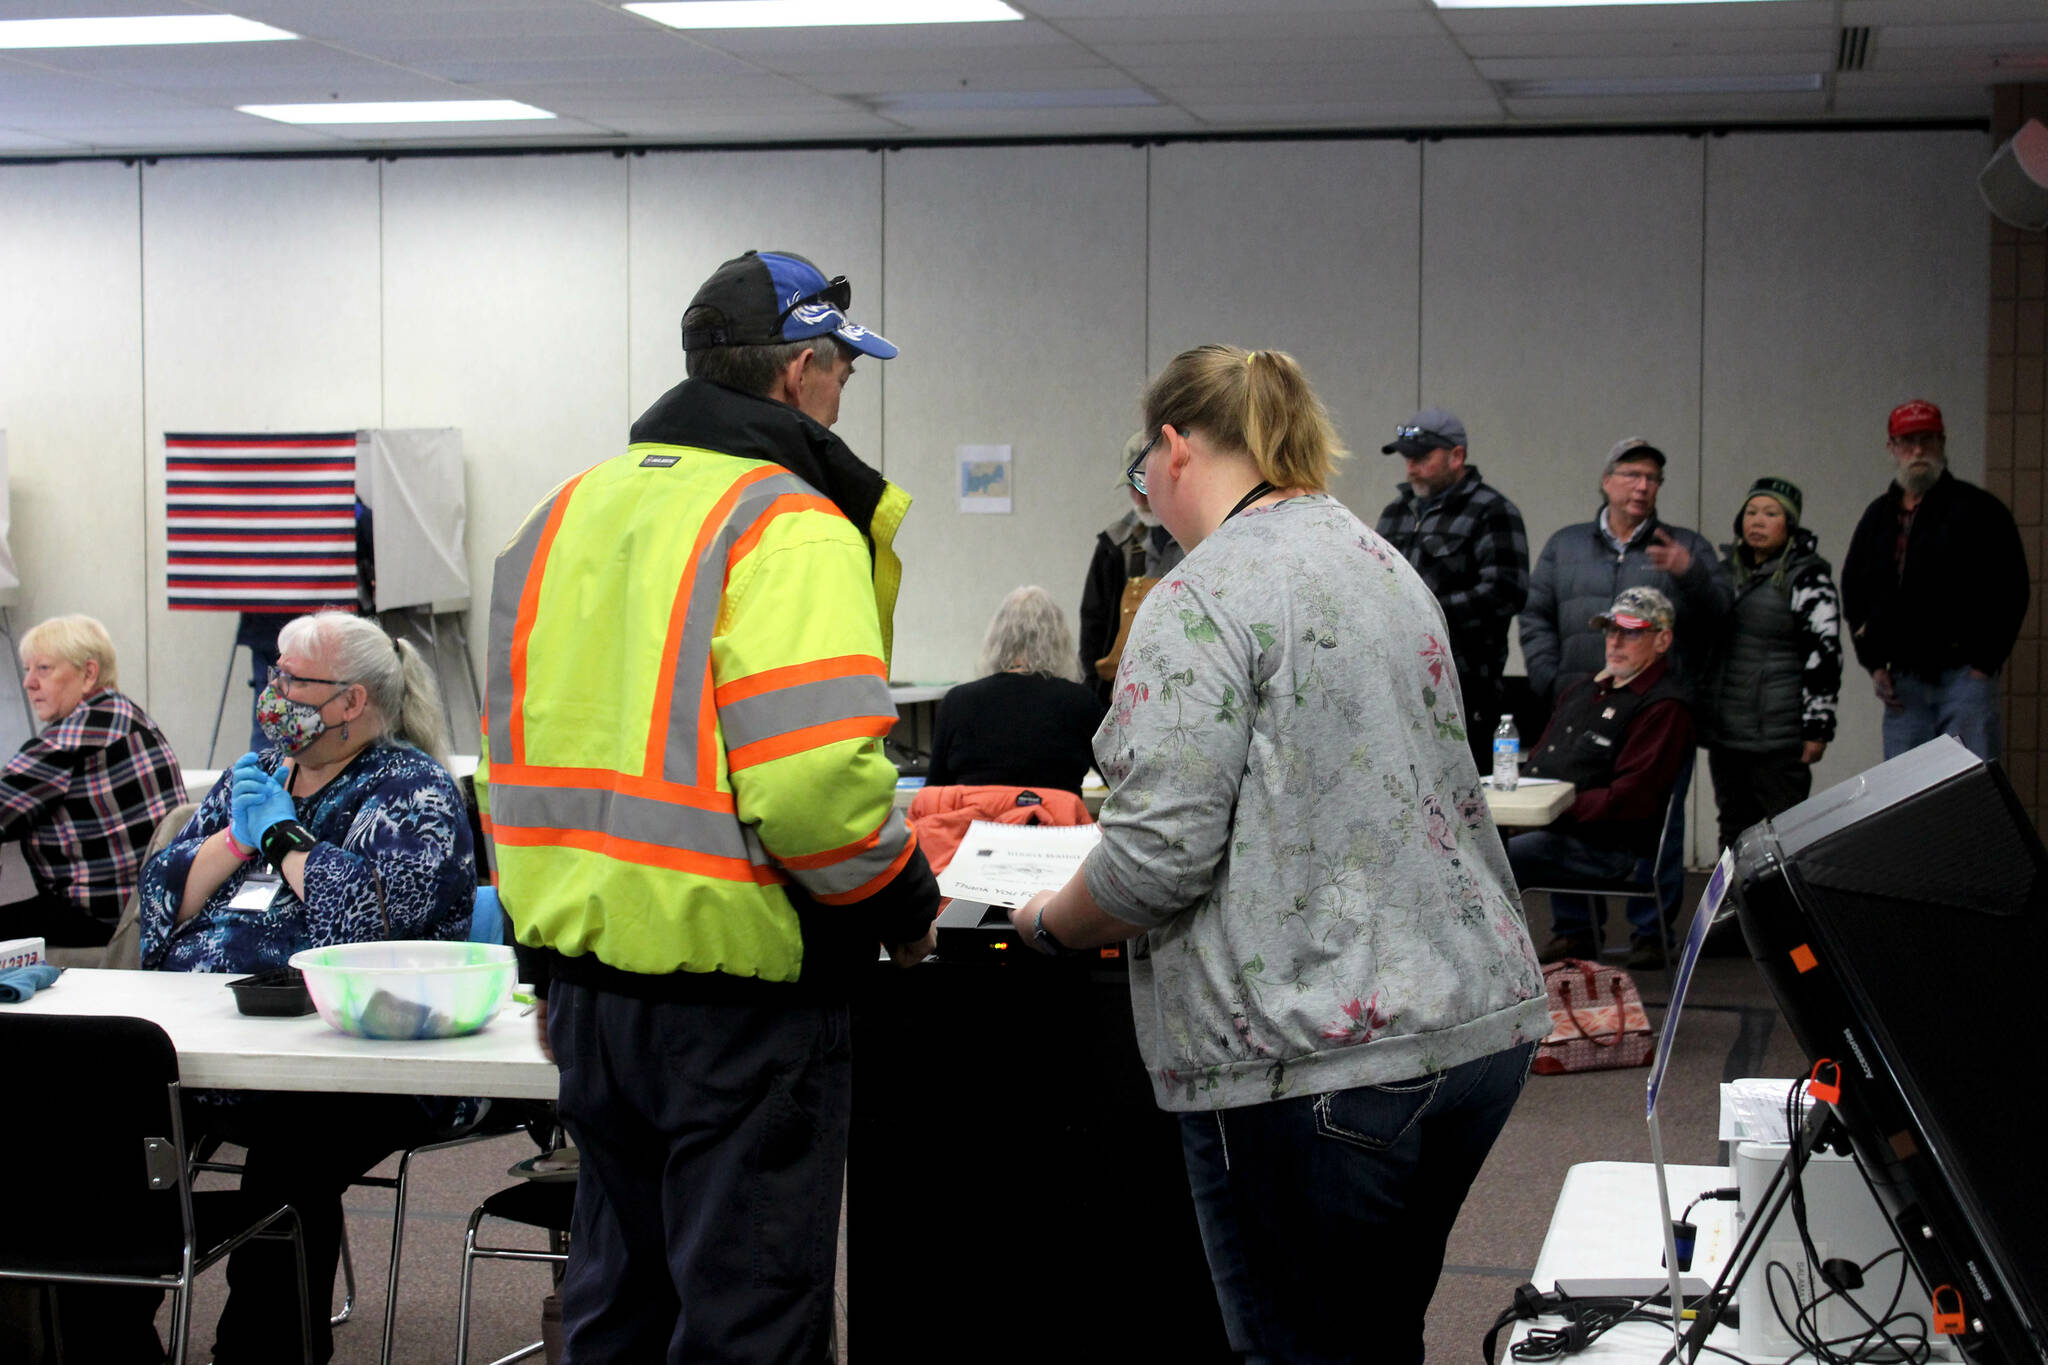 Poll worker Harmony Bolden (right) helps a voter cast their ballot at the Soldotna Regional Sports Complex on Tuesday, Nov. 8, 2022 in Soldotna, Alaska. (Ashlyn O'Hara/Peninsula Clarion)